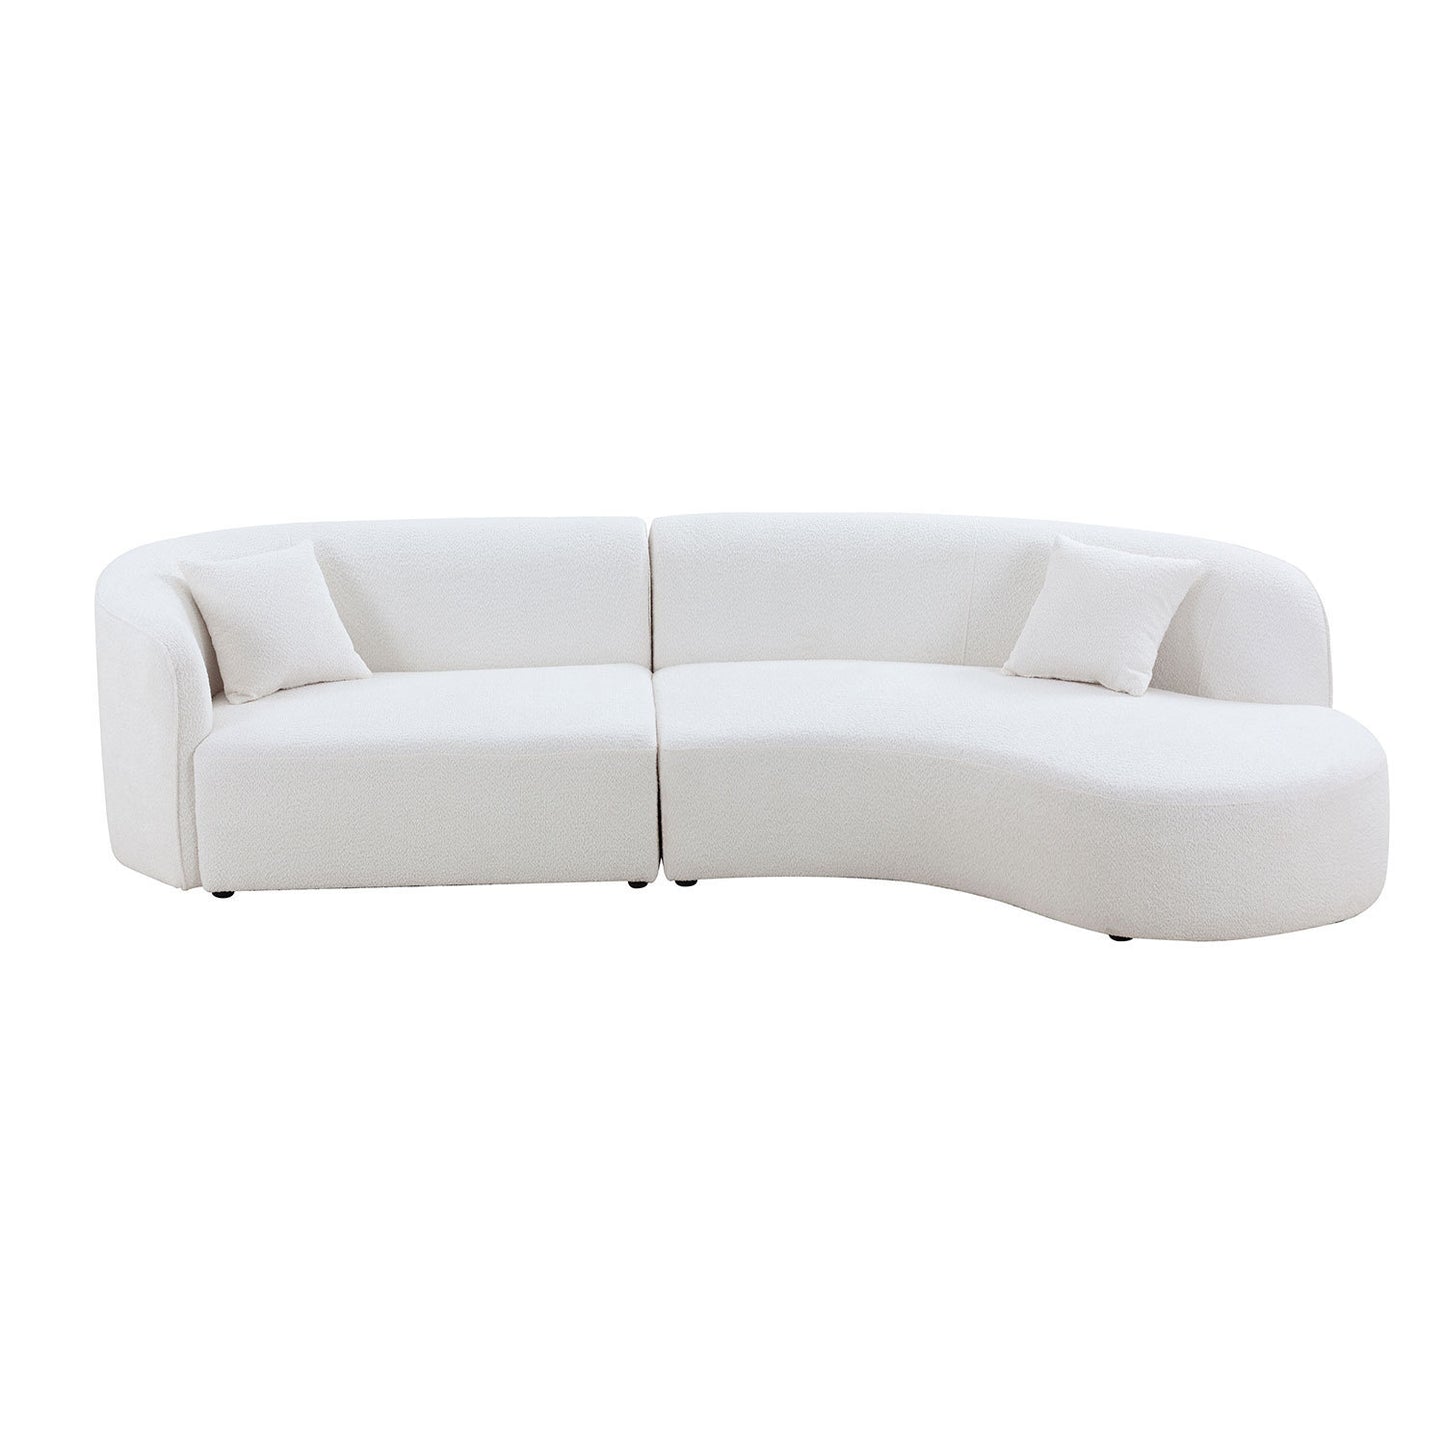 Luxury Modern Style Living Room Upholstery Curved Sofa with Chaise 2-Piece Set, Right Hand Facing Sectional, Boucle Couch, White